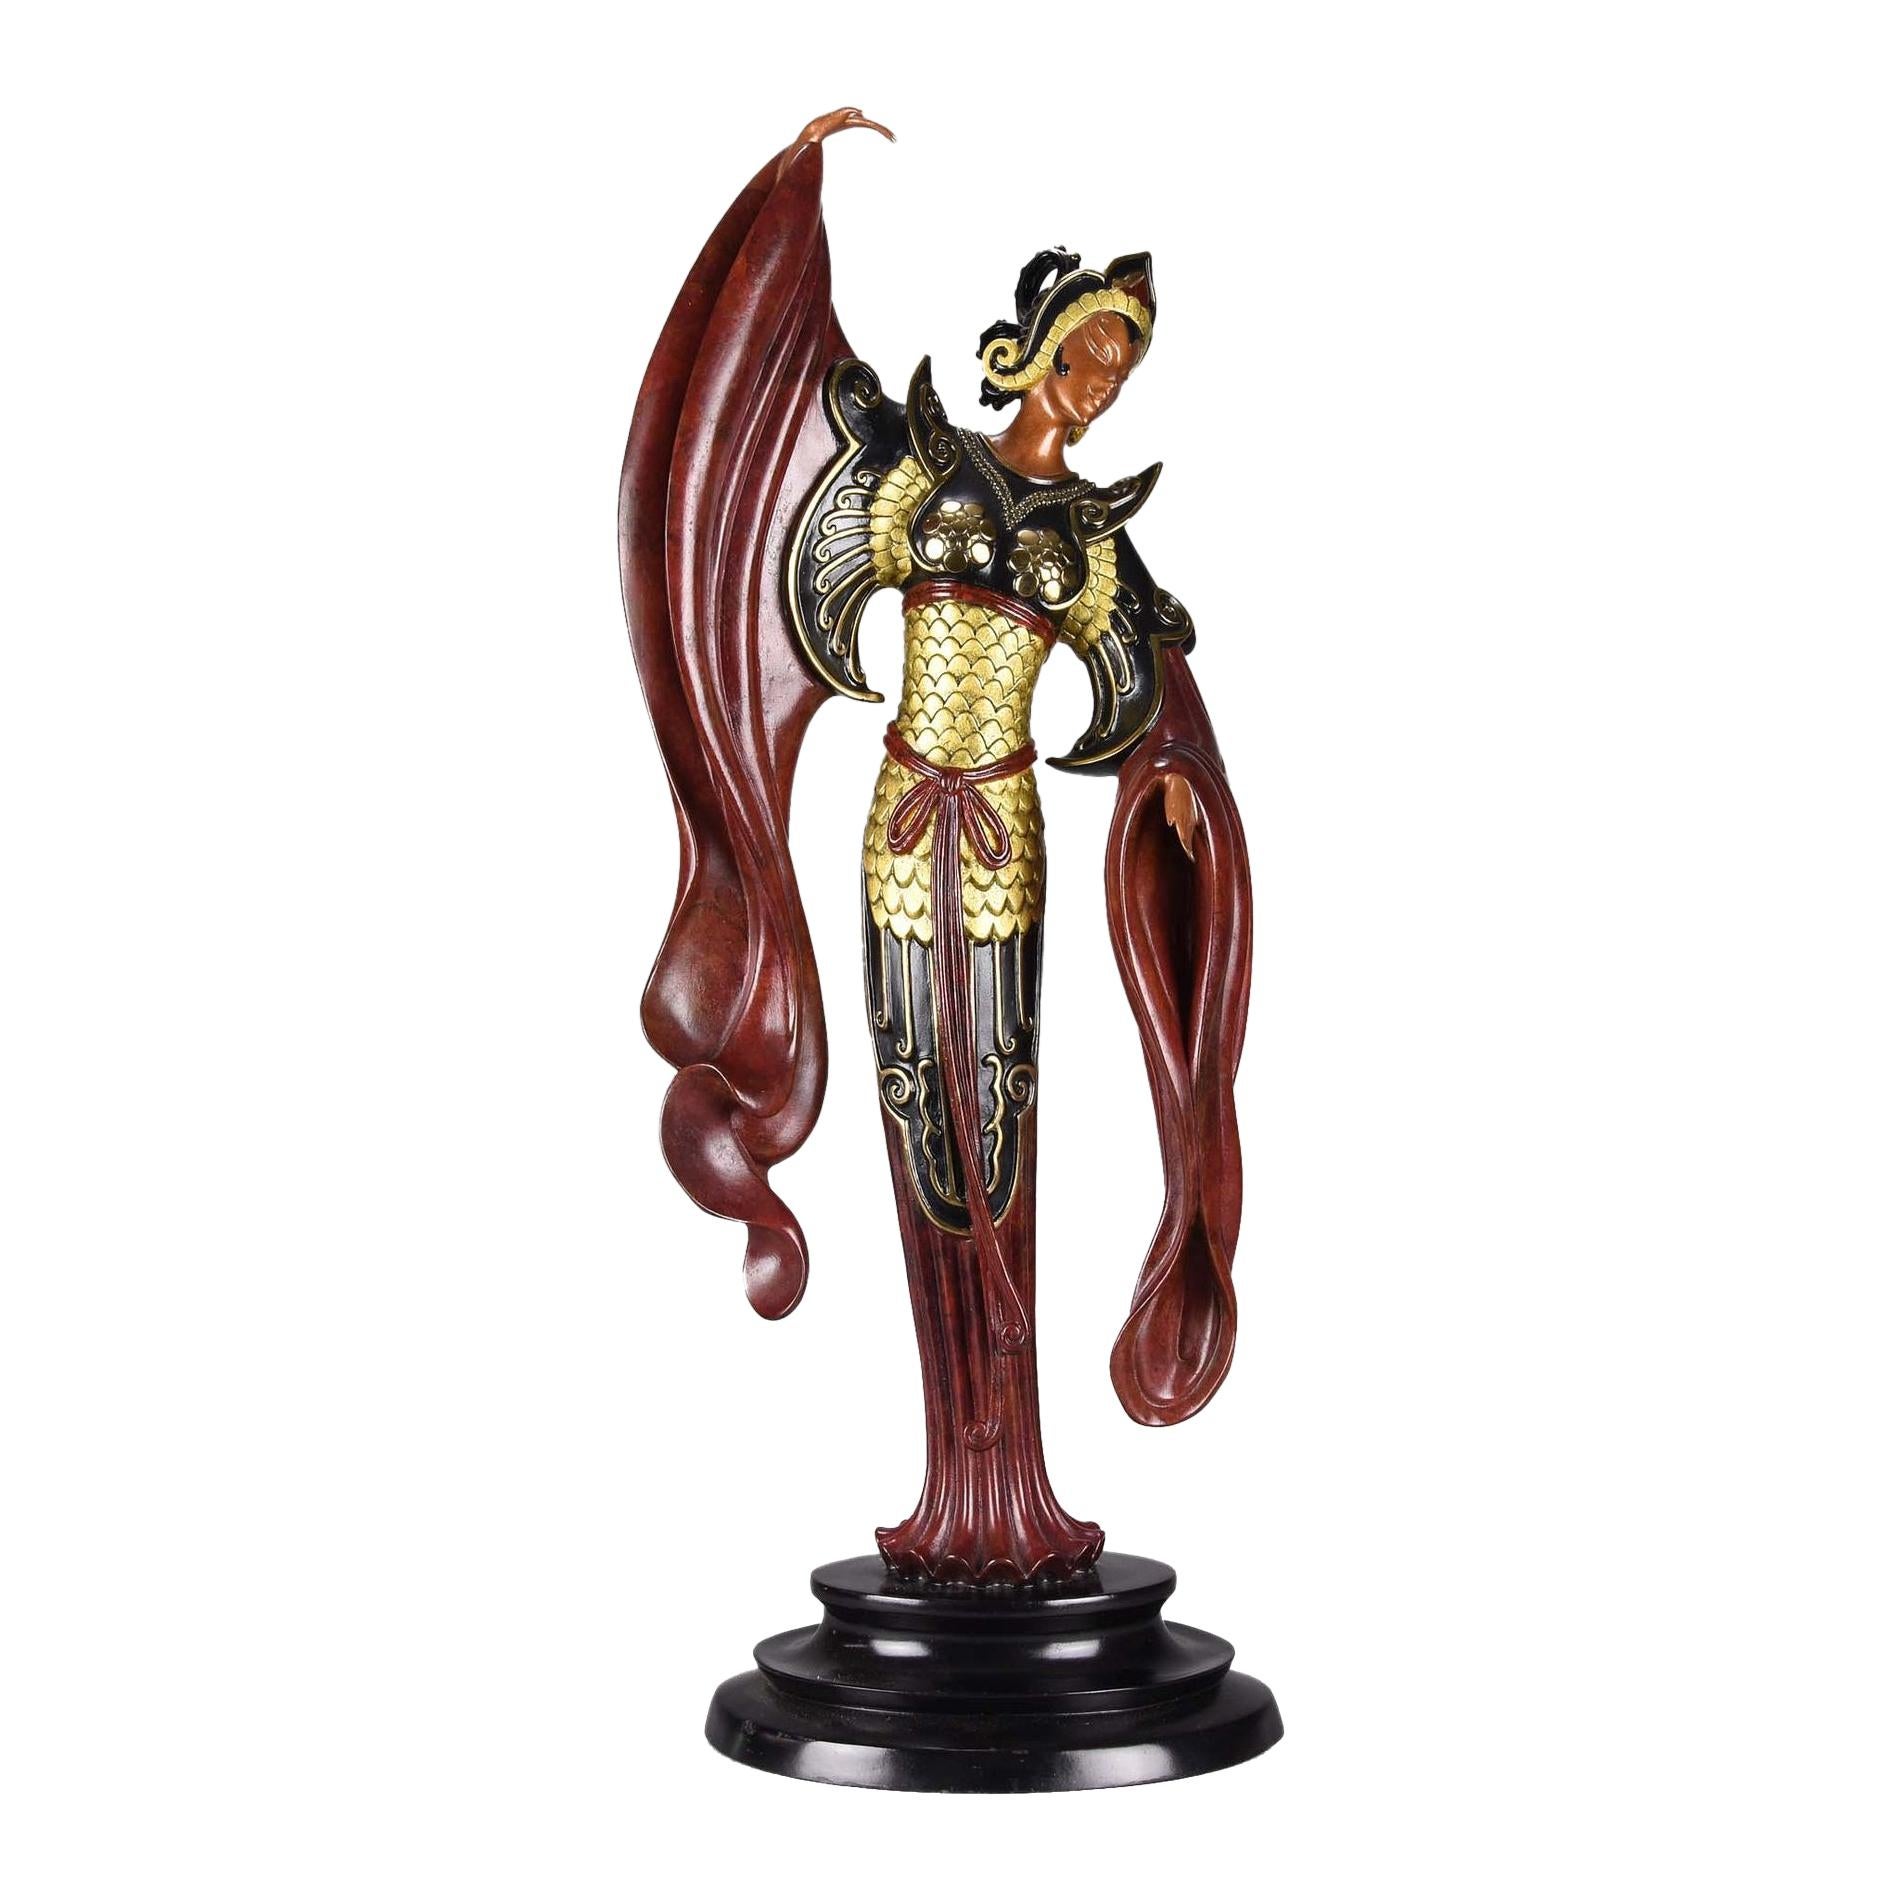 Cold Painted Limited Edition Bronze Figure "Chinese Legend" by Erté For Sale